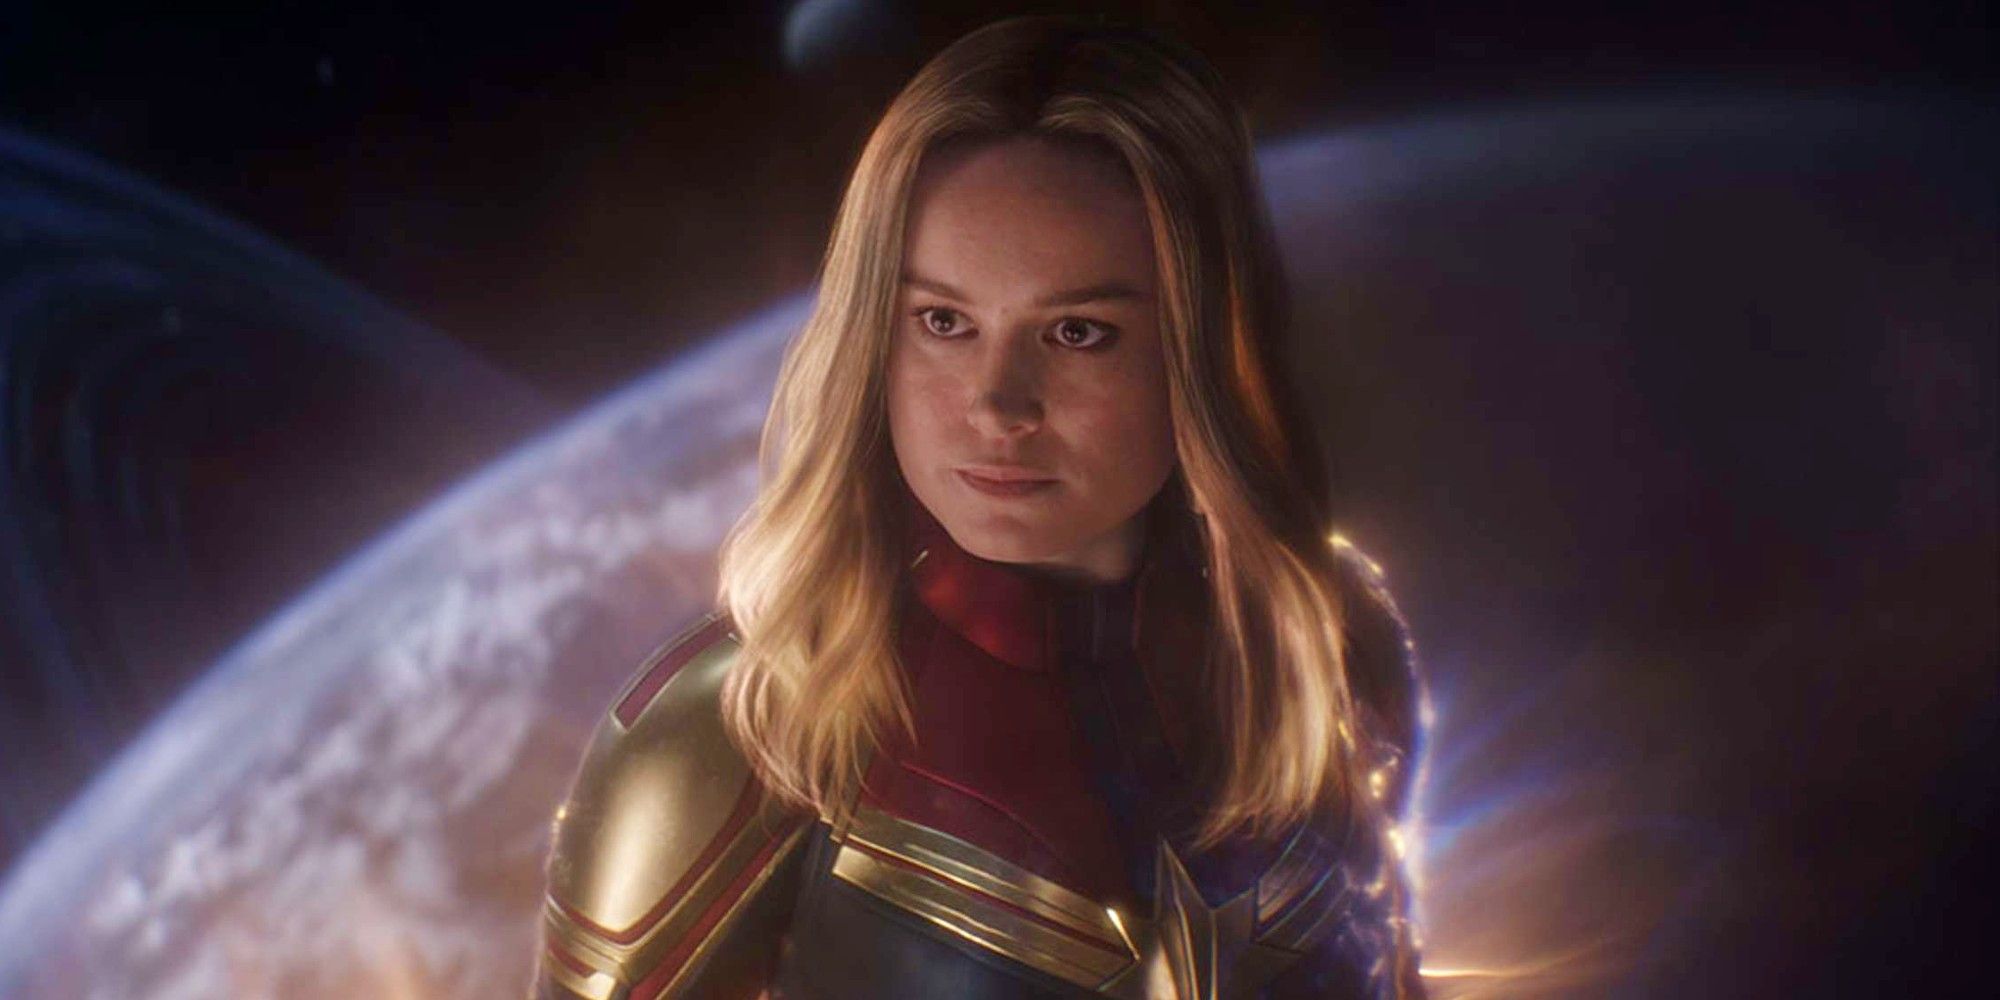 Brie Larson as Captain Marvel in the MCU